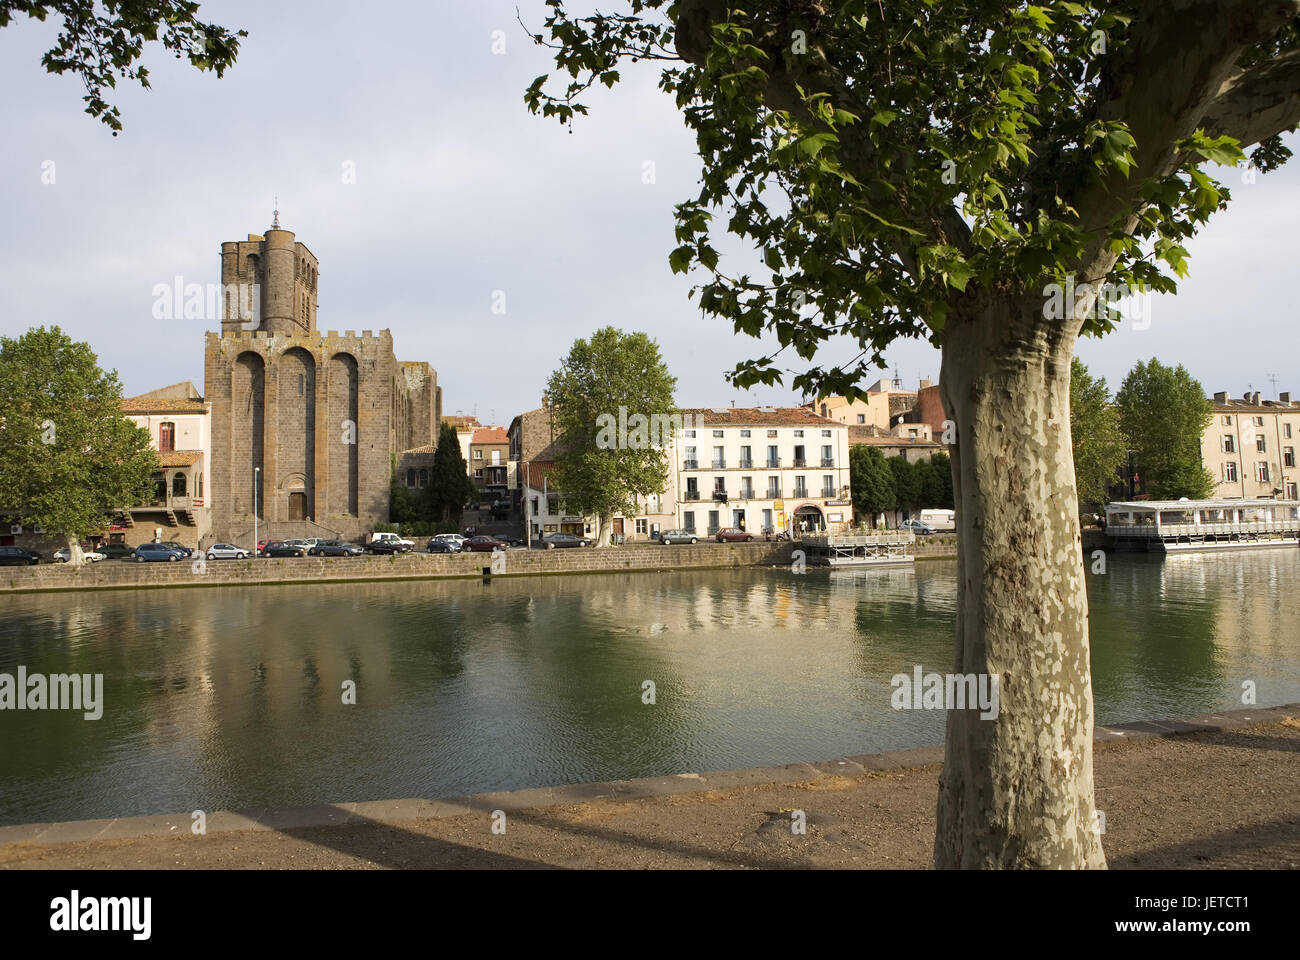 France, Languedoc-Roussillon, dipartimento Herault, Agde, cattedrale Saint-Etienne Foto Stock